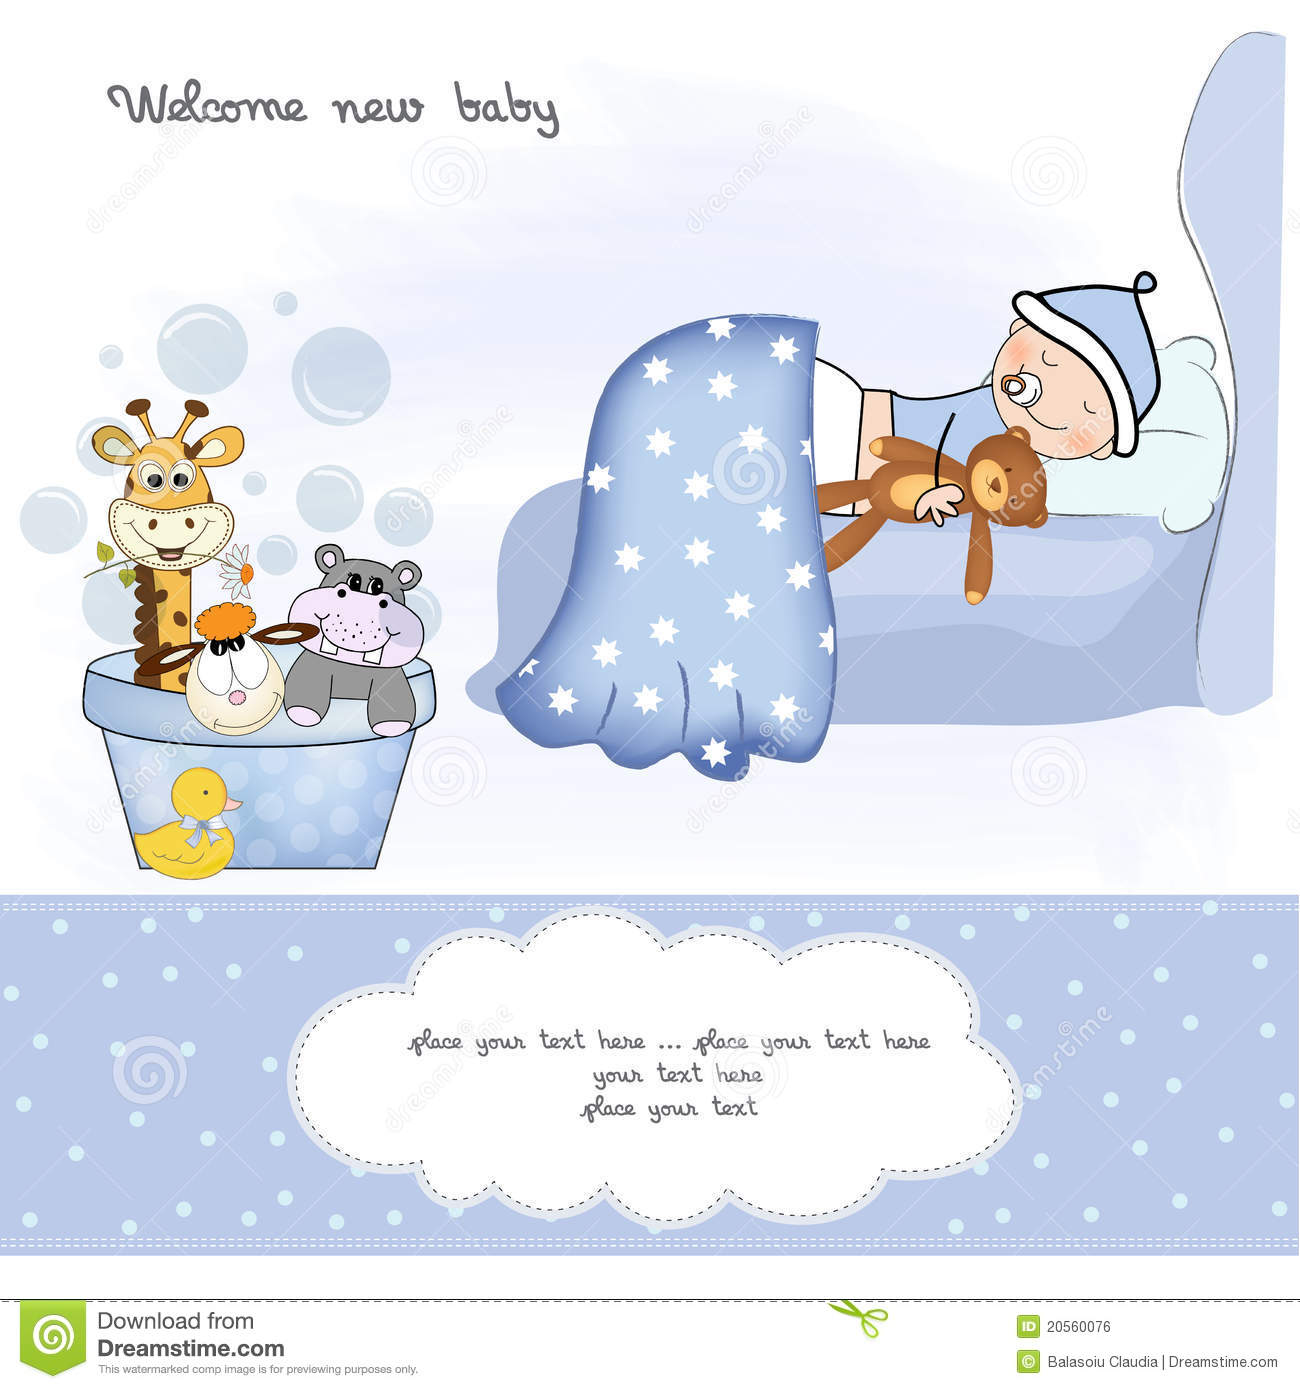 Welcome New Baby Wishes Picture